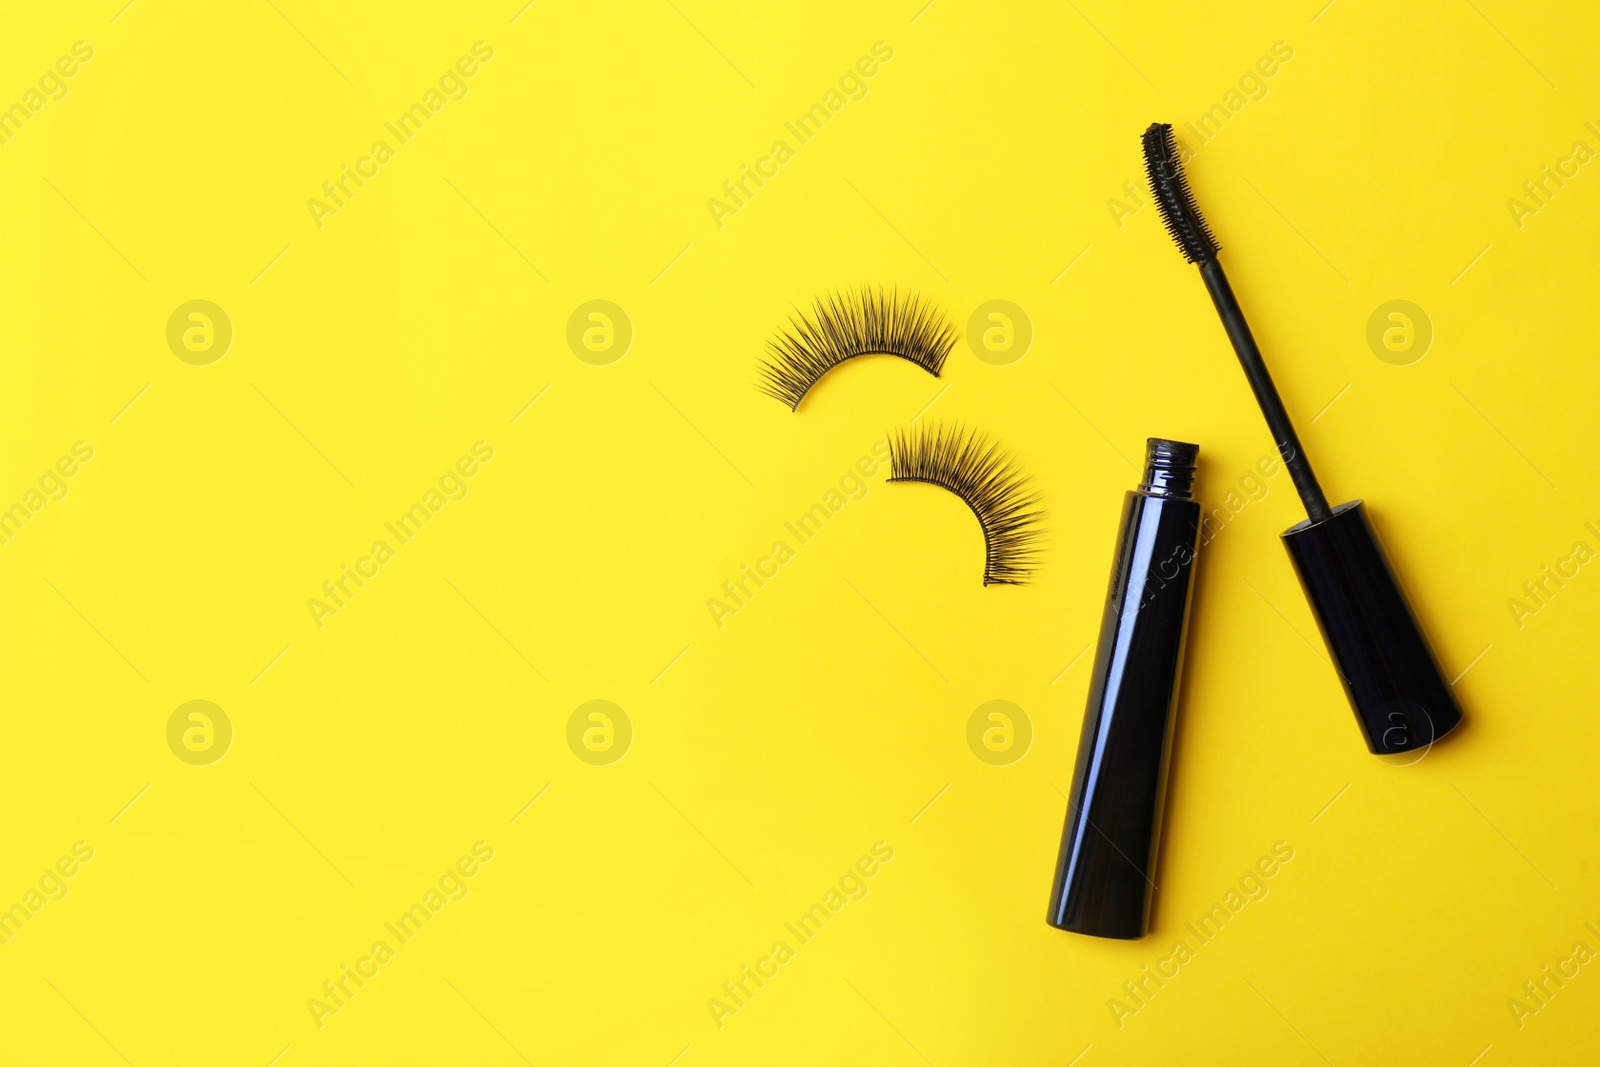 Photo of Black mascara and fake eyelashes on yellow background, flat lay with space for text. Makeup product